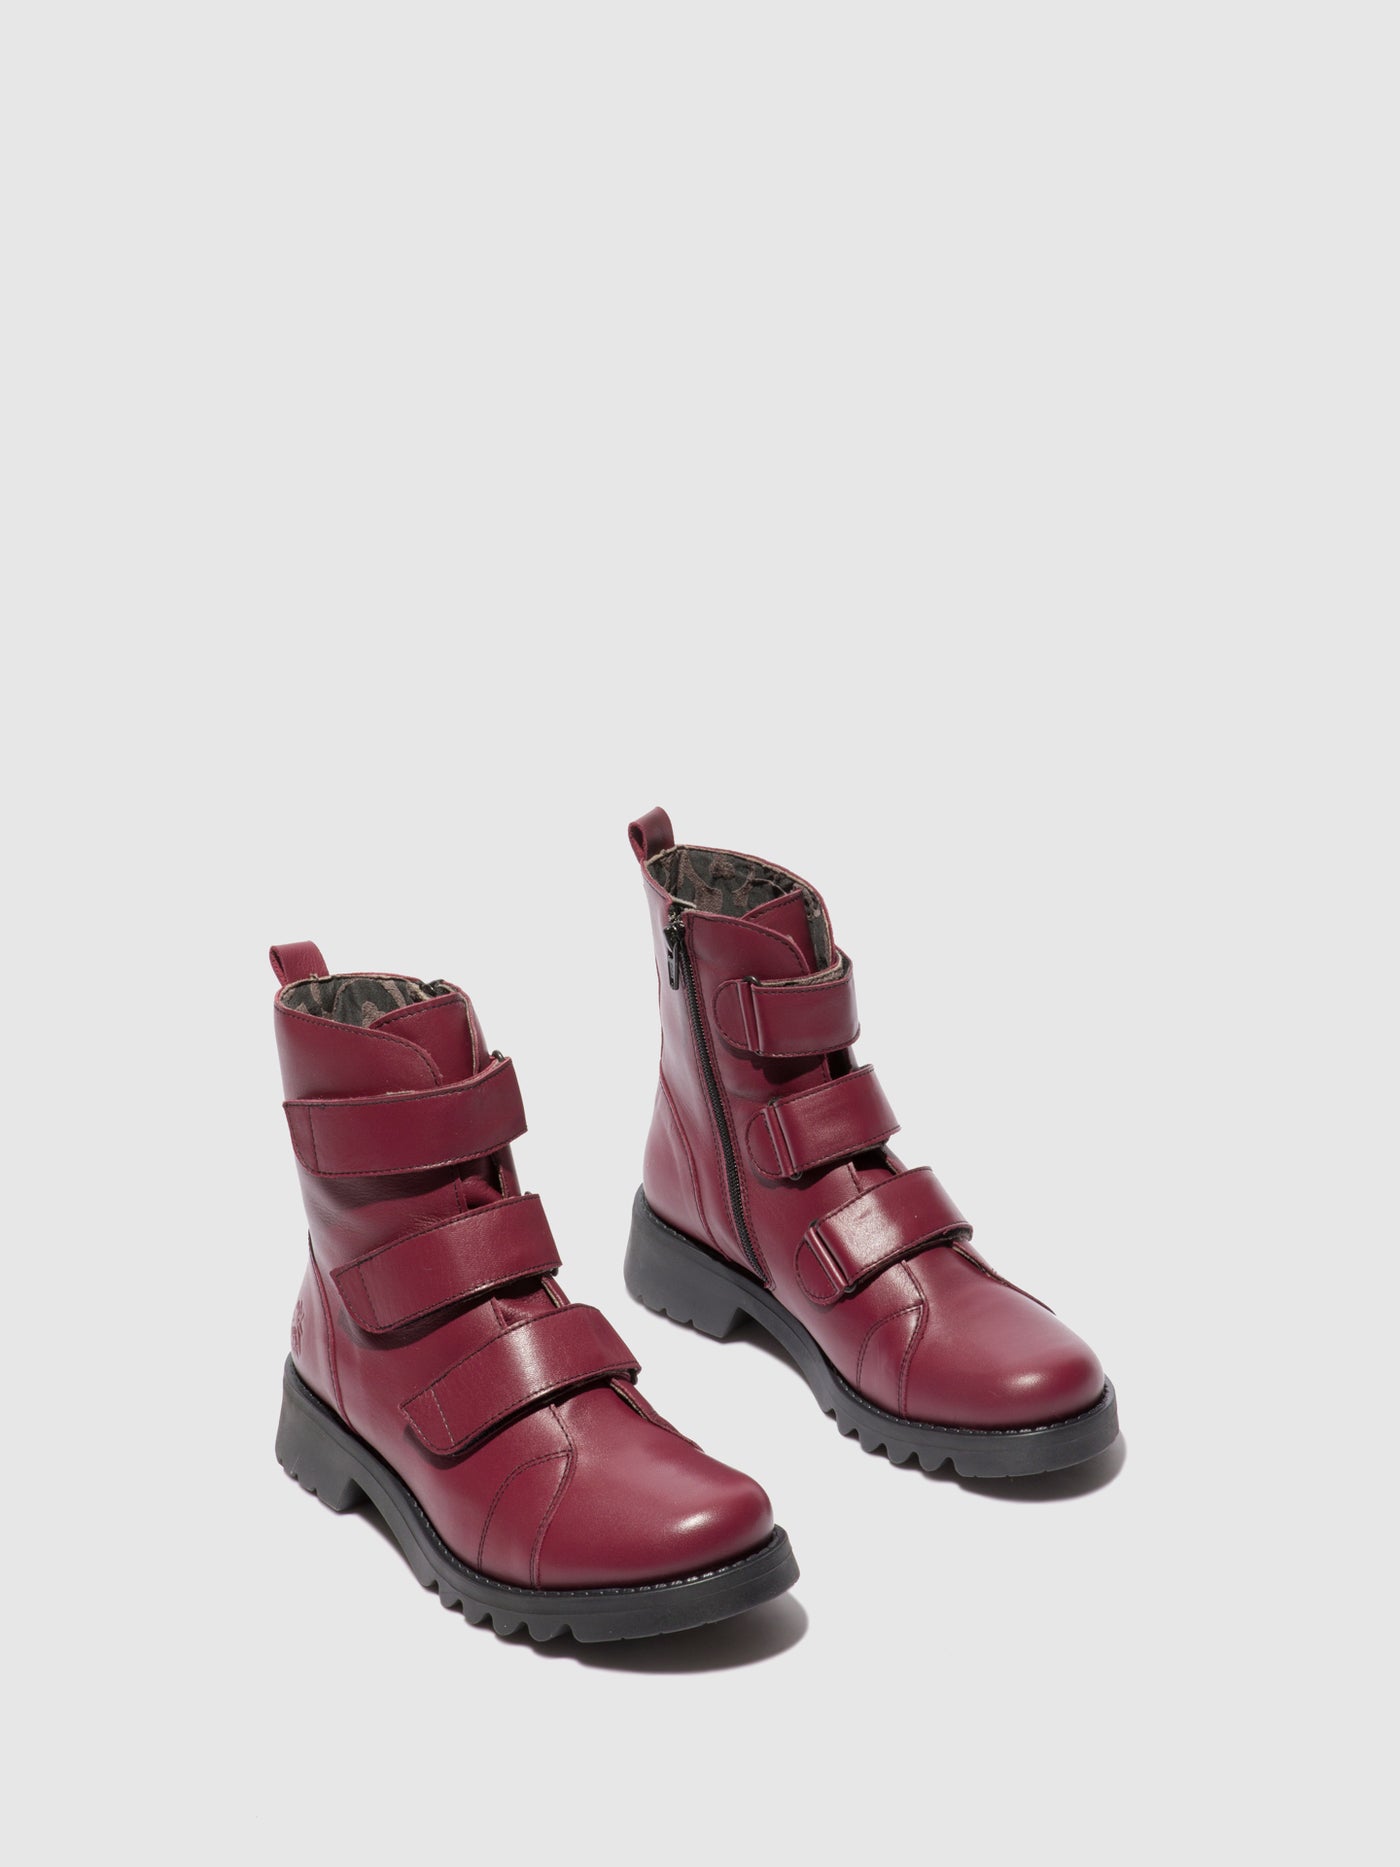 Velcro Ankle Boots RACH790FLY LEATHER WINE(BLACK)